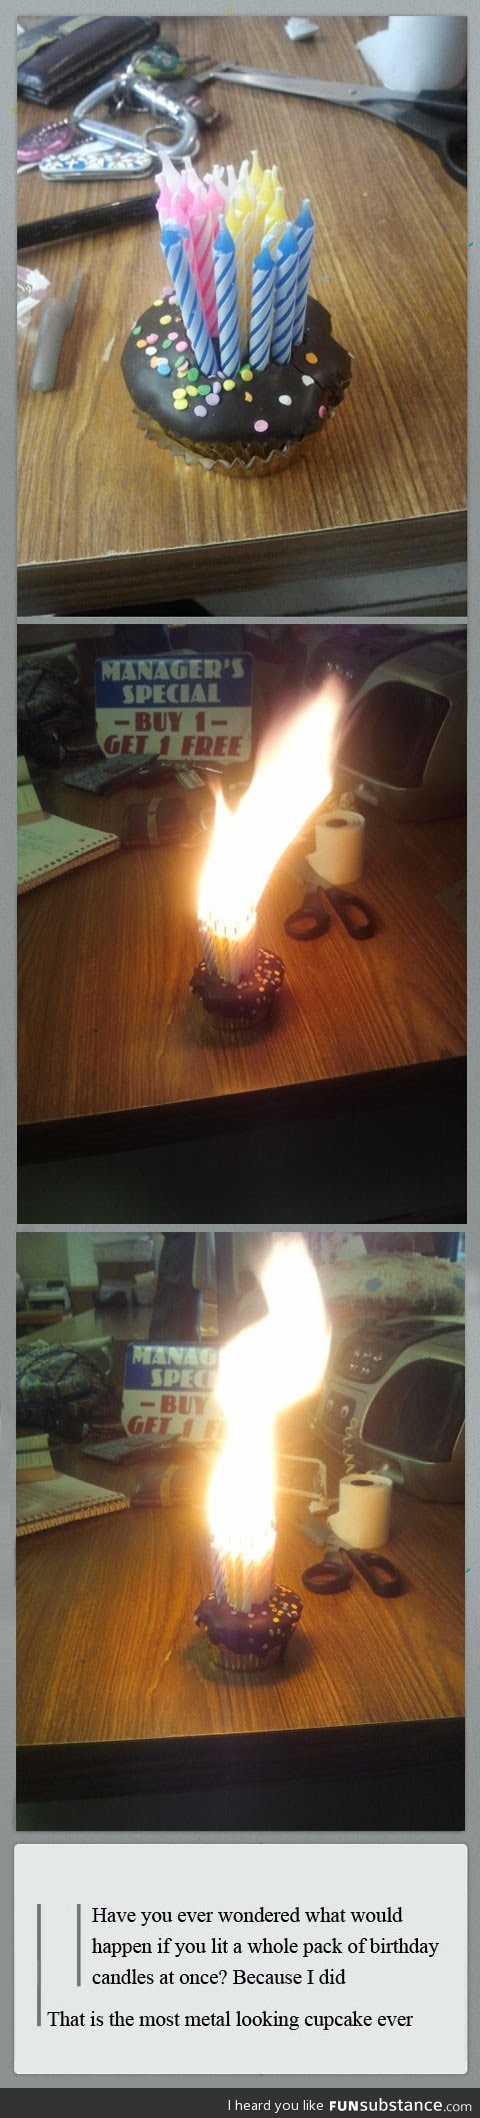 Lighting up a whole pack of birthday candles